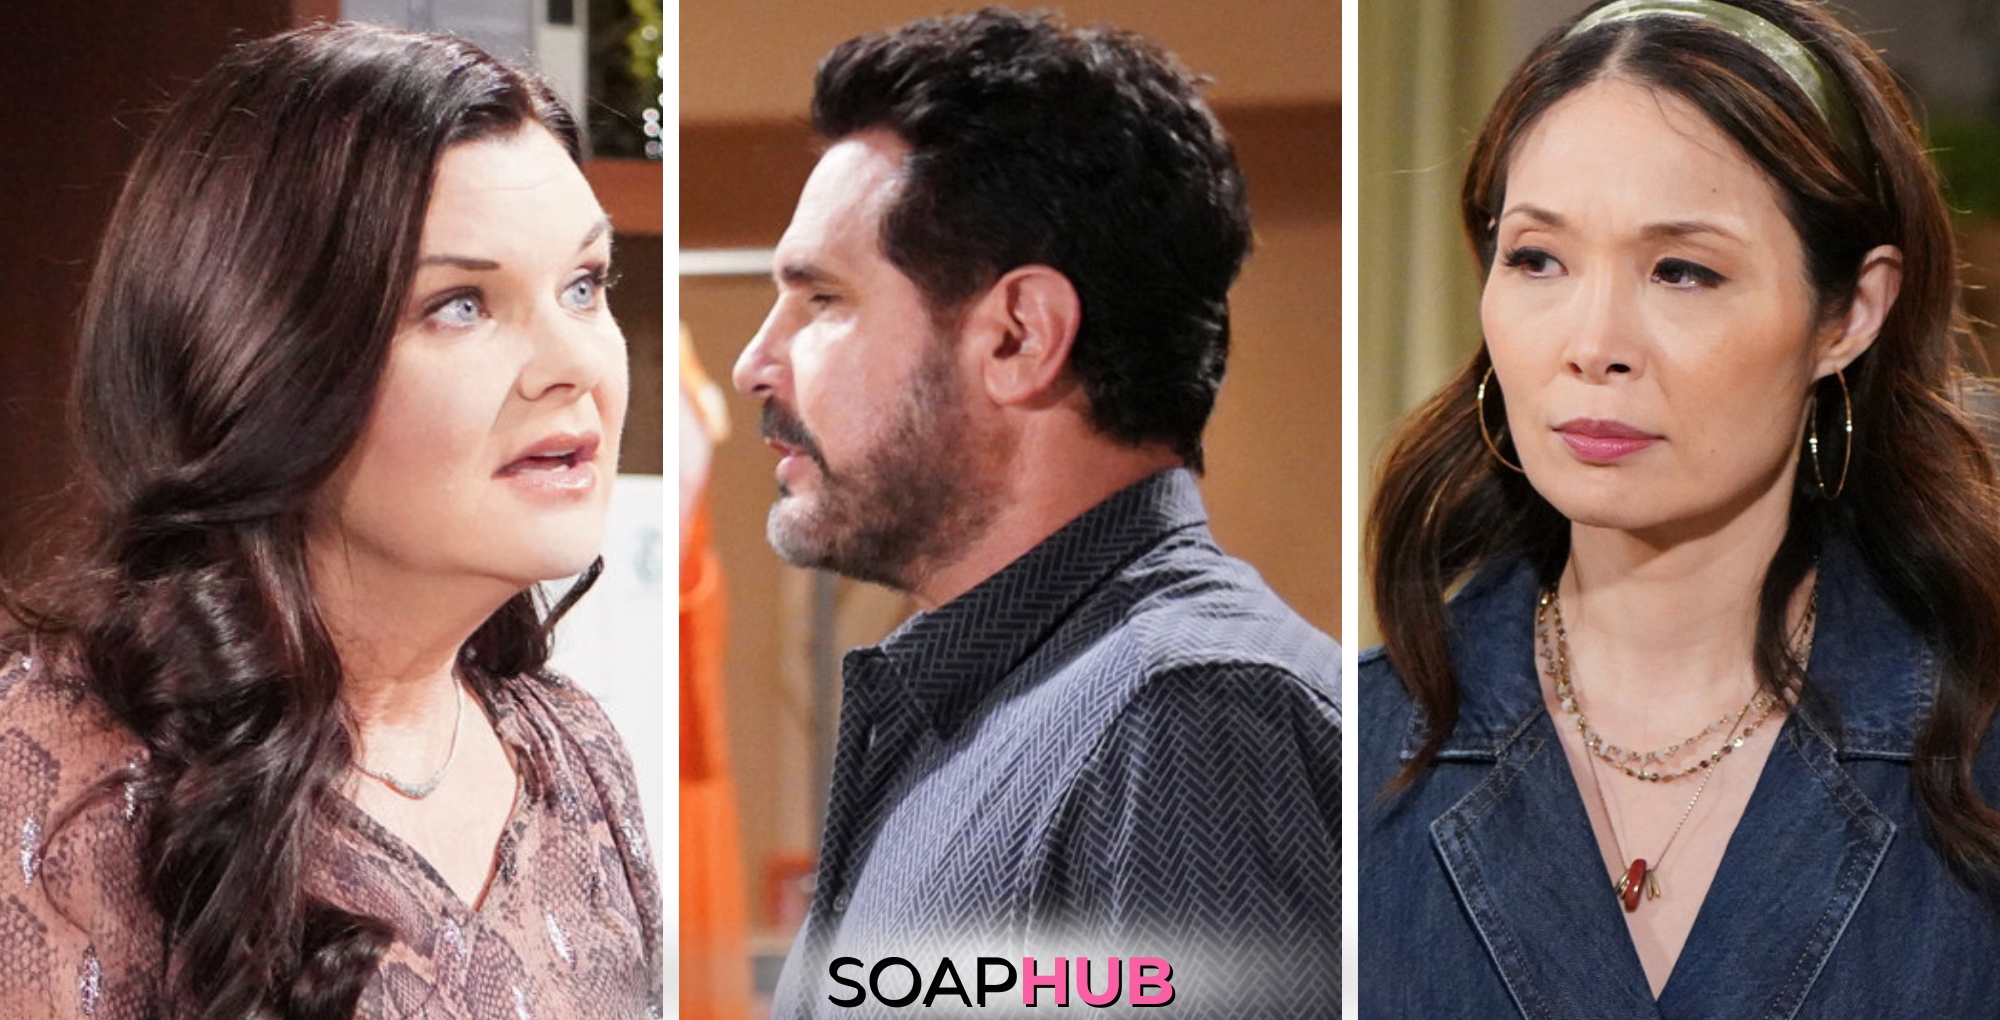 Bold and the Beautiful Weekly Spoilers for June 10 - 14 Feature Katie, Bill and Poppy with the Soap Hub Logo Across the Bottom.